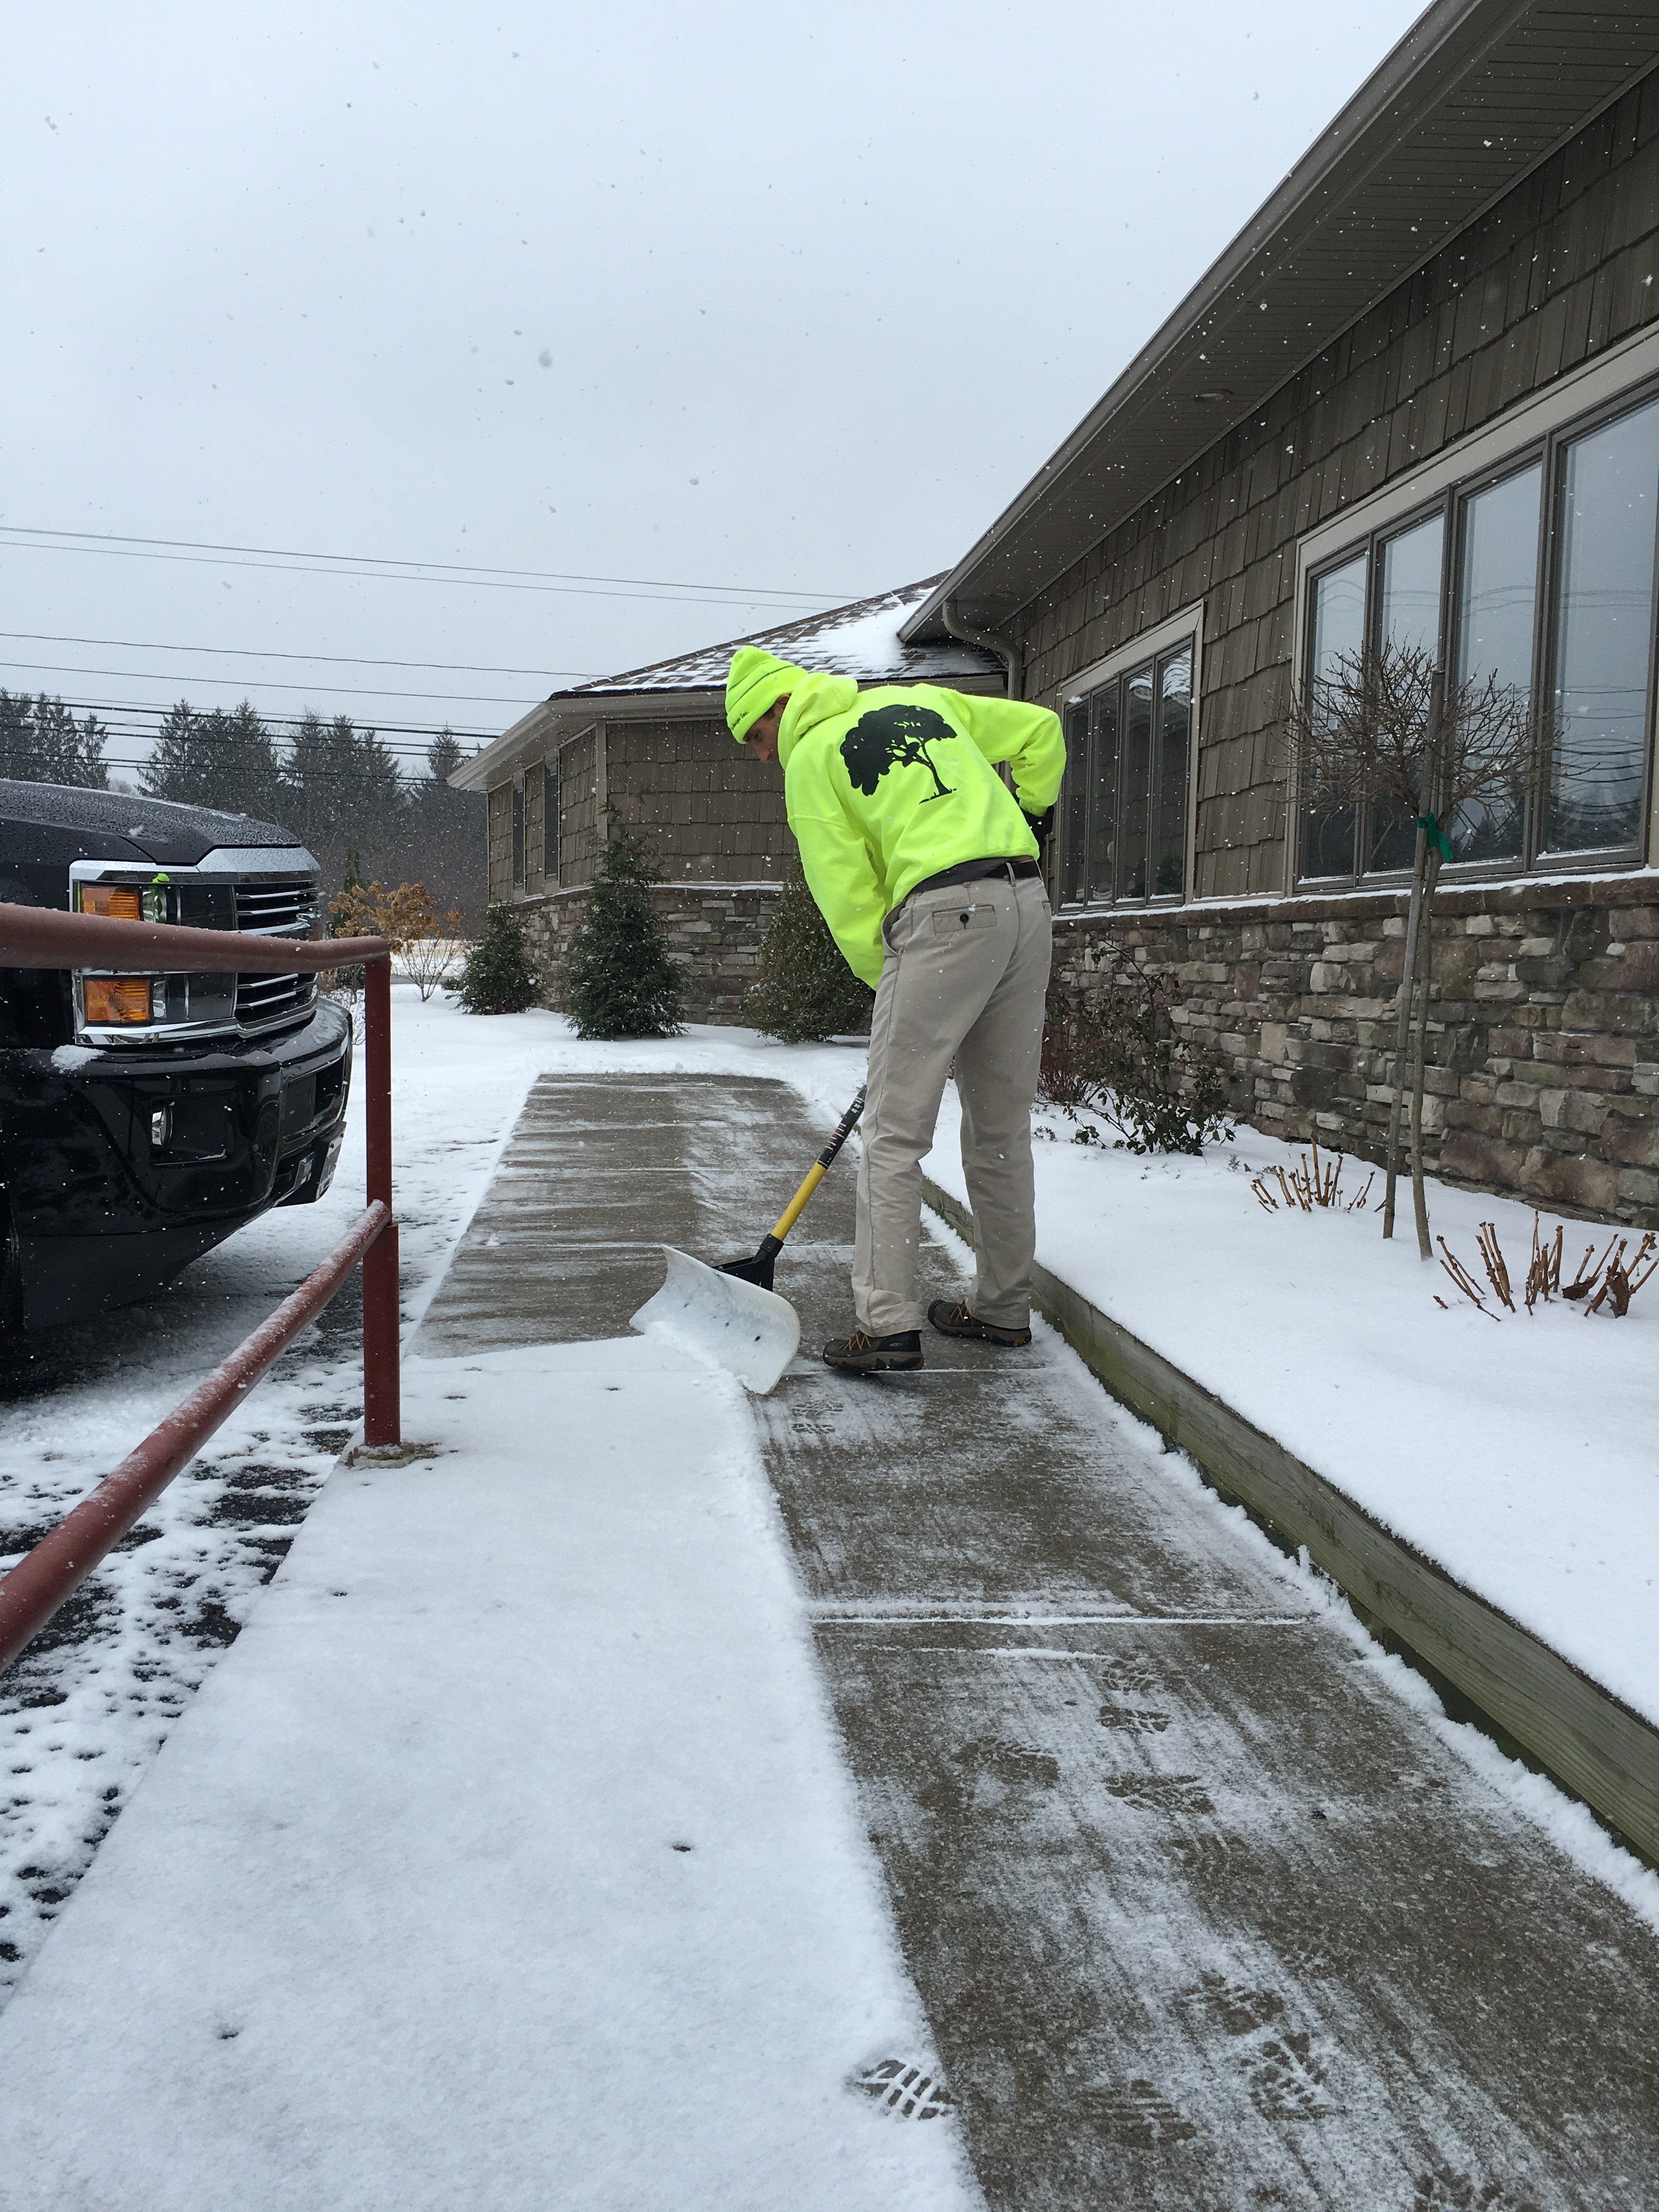 Staff shoveling snow at commercial building